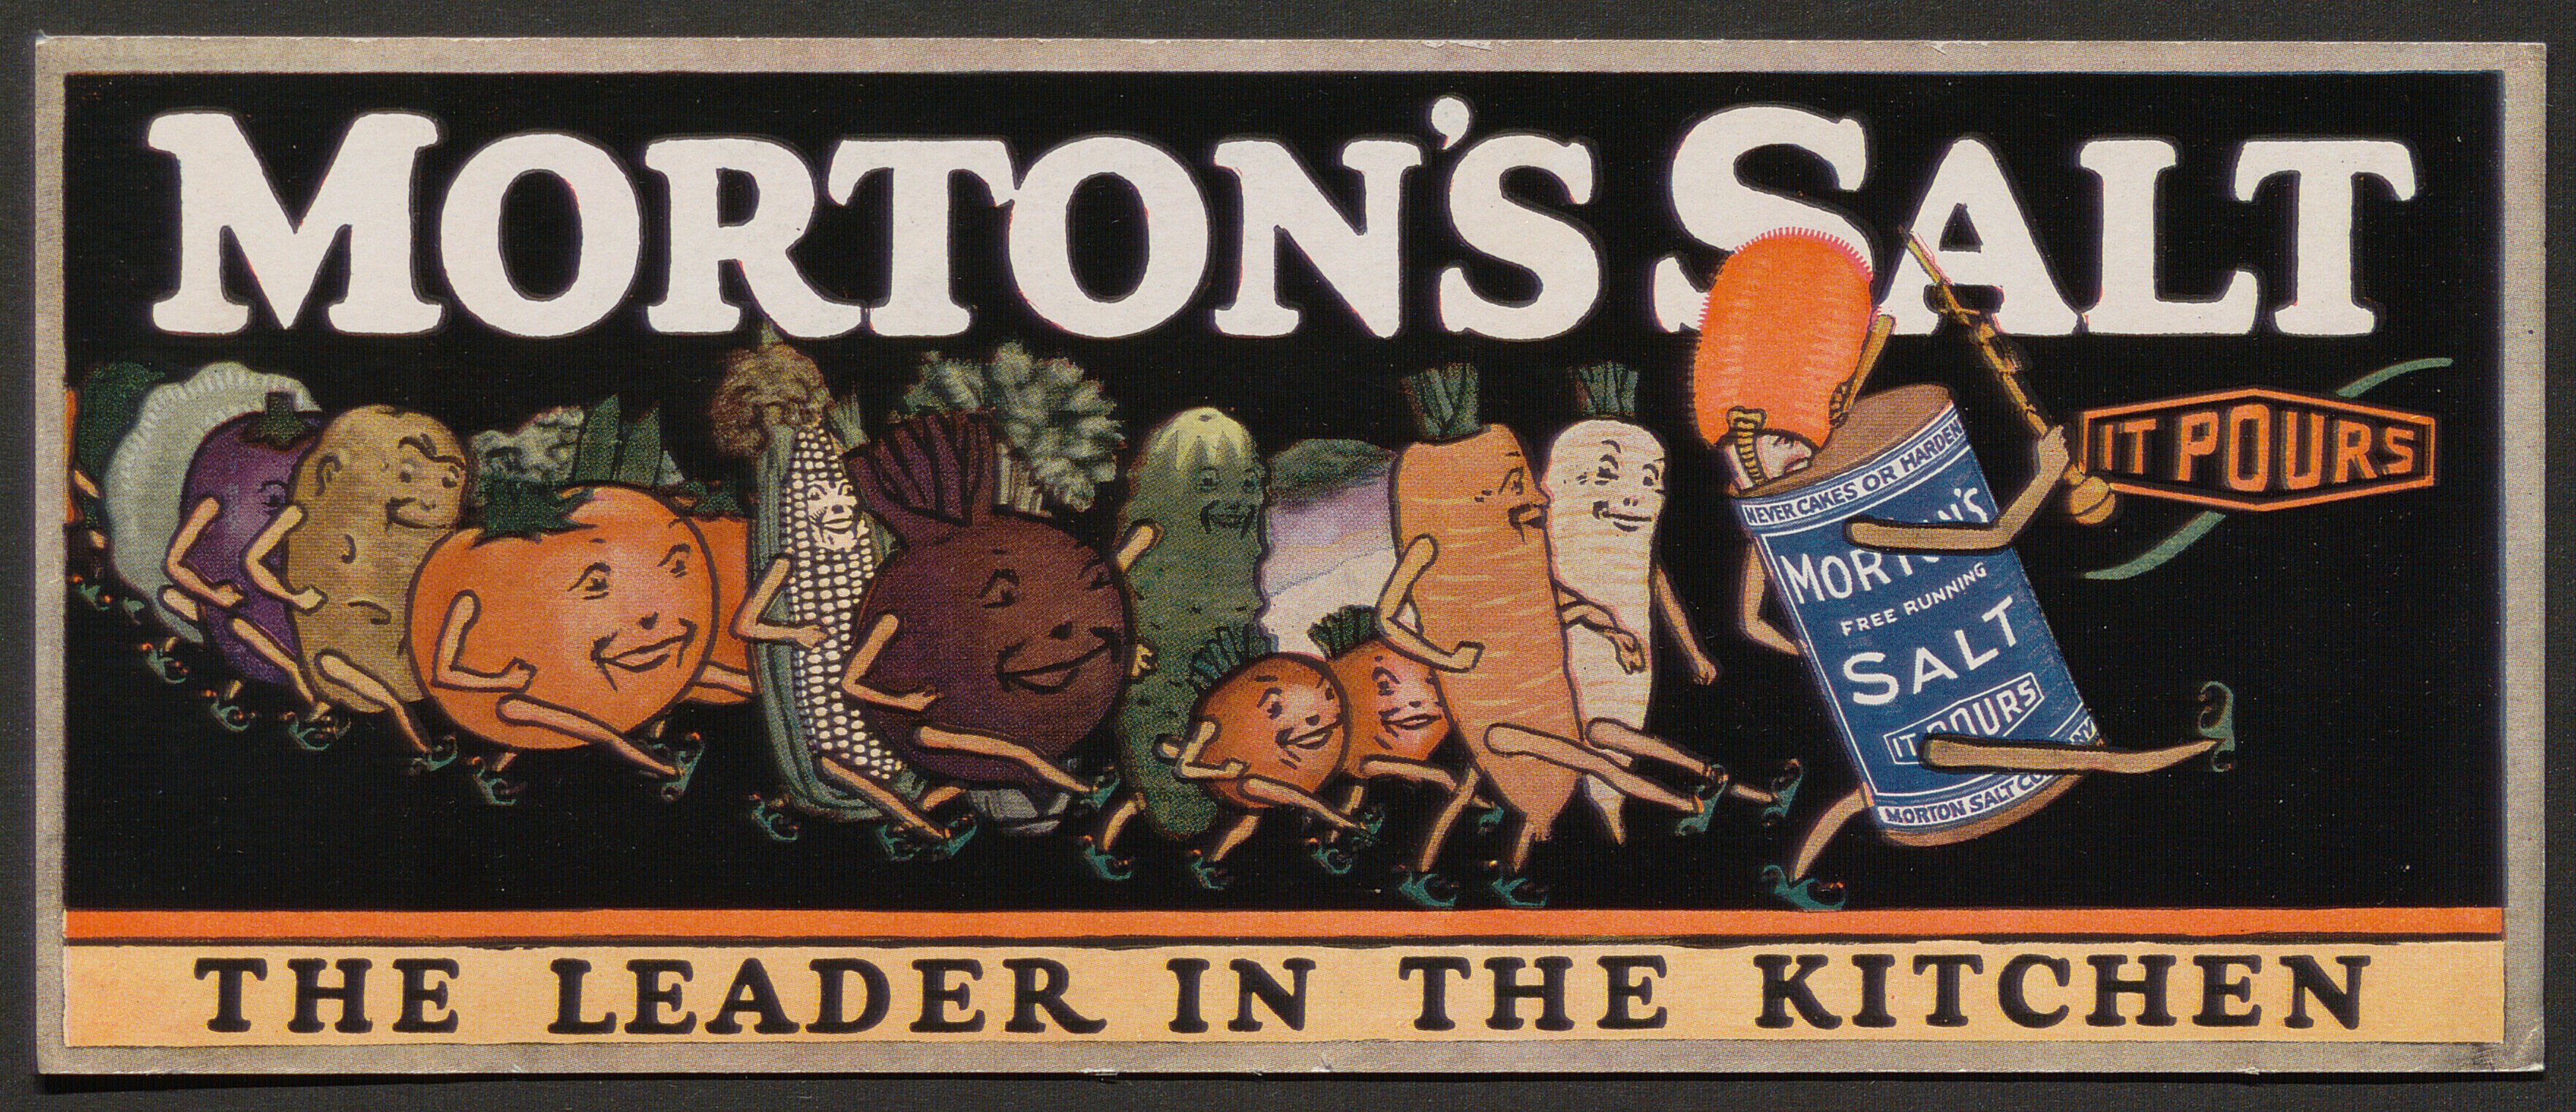 Illustration of vegetables marching behind a canister of salt. Text is "the leader in the kitchen"